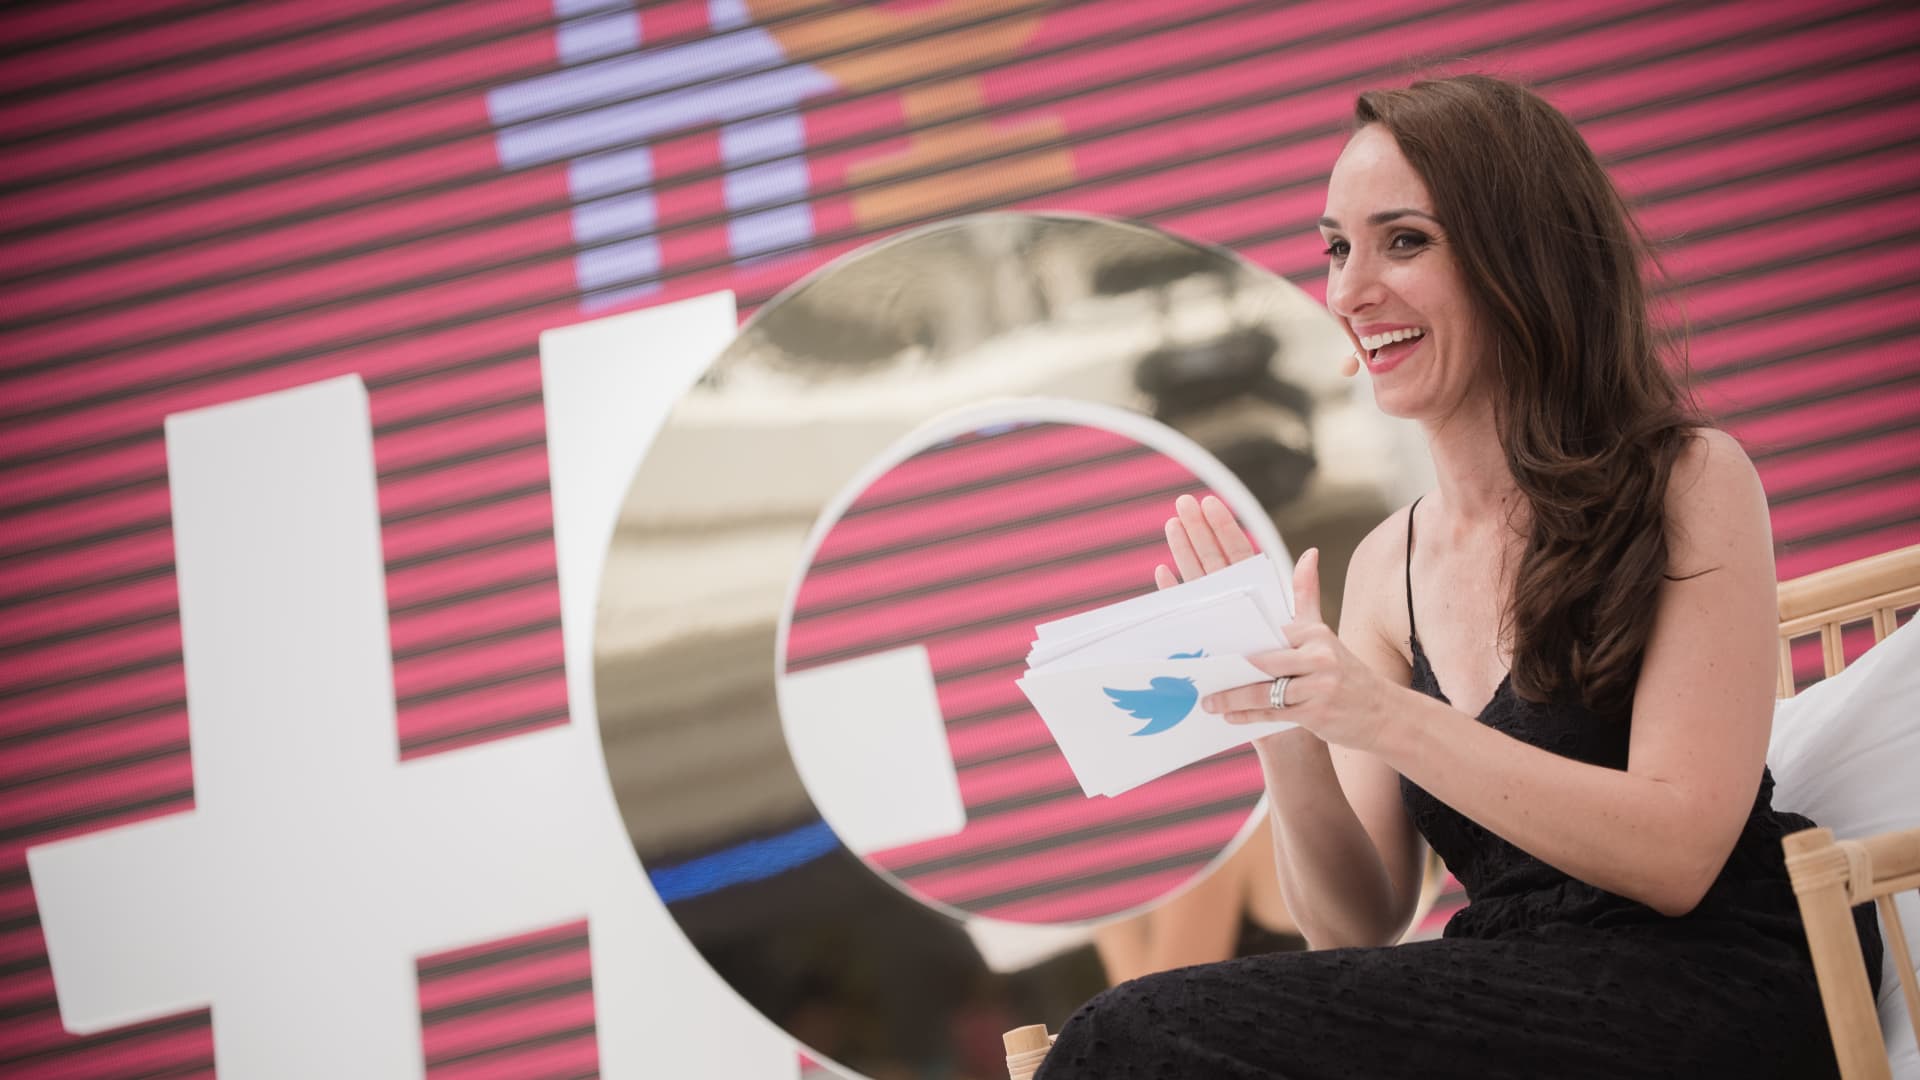 Twitter CMO Leslie Berland attends Twitter's #HereWeAre brunch and conversation at Cannes Lions on June 20, 2018 in Cannes, France.